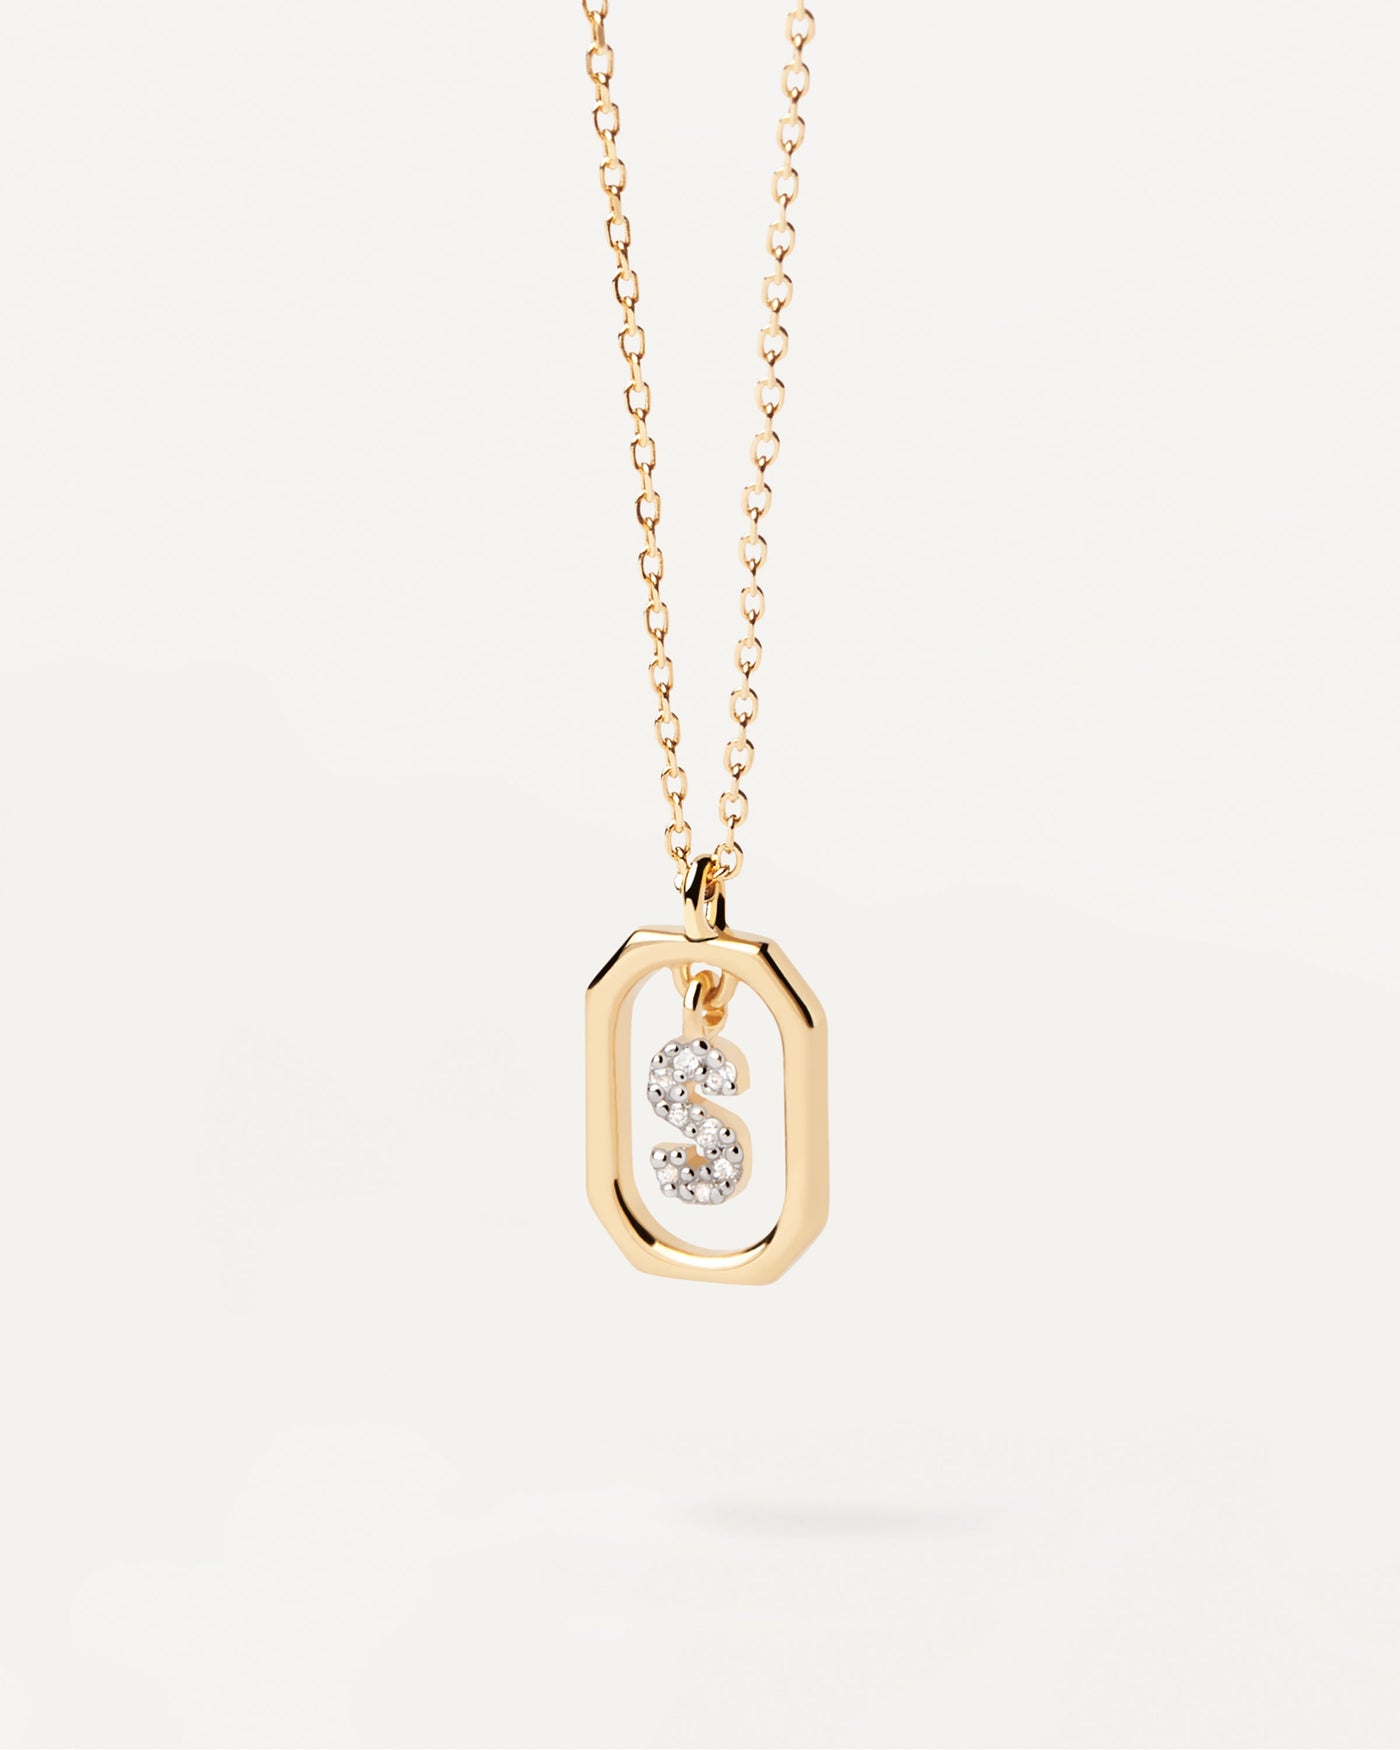 2023 Selection | Mini Letter S Necklace. Small initial S necklace in zirconia inside gold-plated silver octagonal pendant. Get the latest arrival from PDPAOLA. Place your order safely and get this Best Seller. Free Shipping.